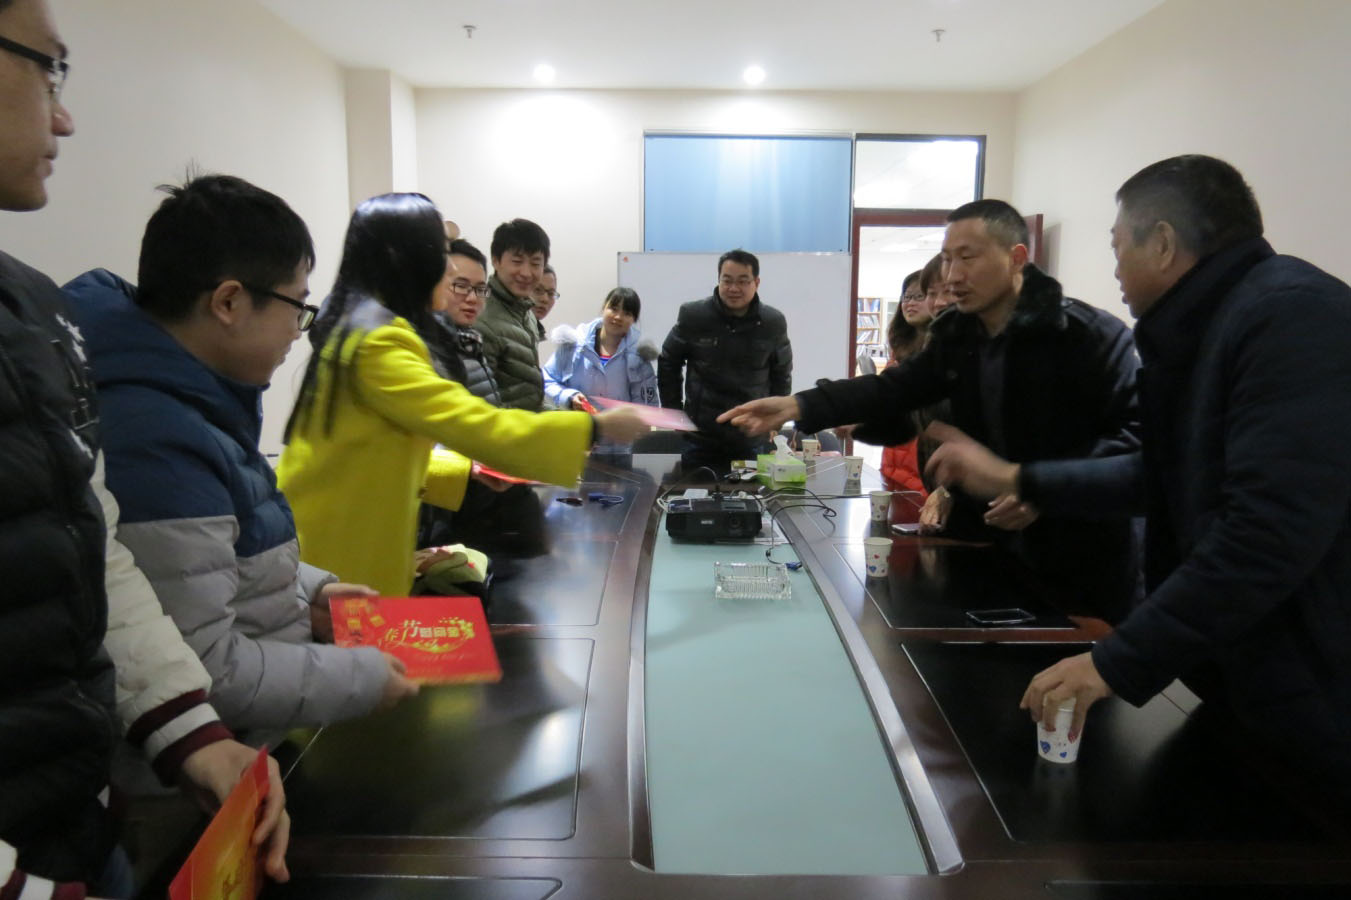 6.Dai xiaolin, vice chairman of the industrial association of the development zone, came to visit th